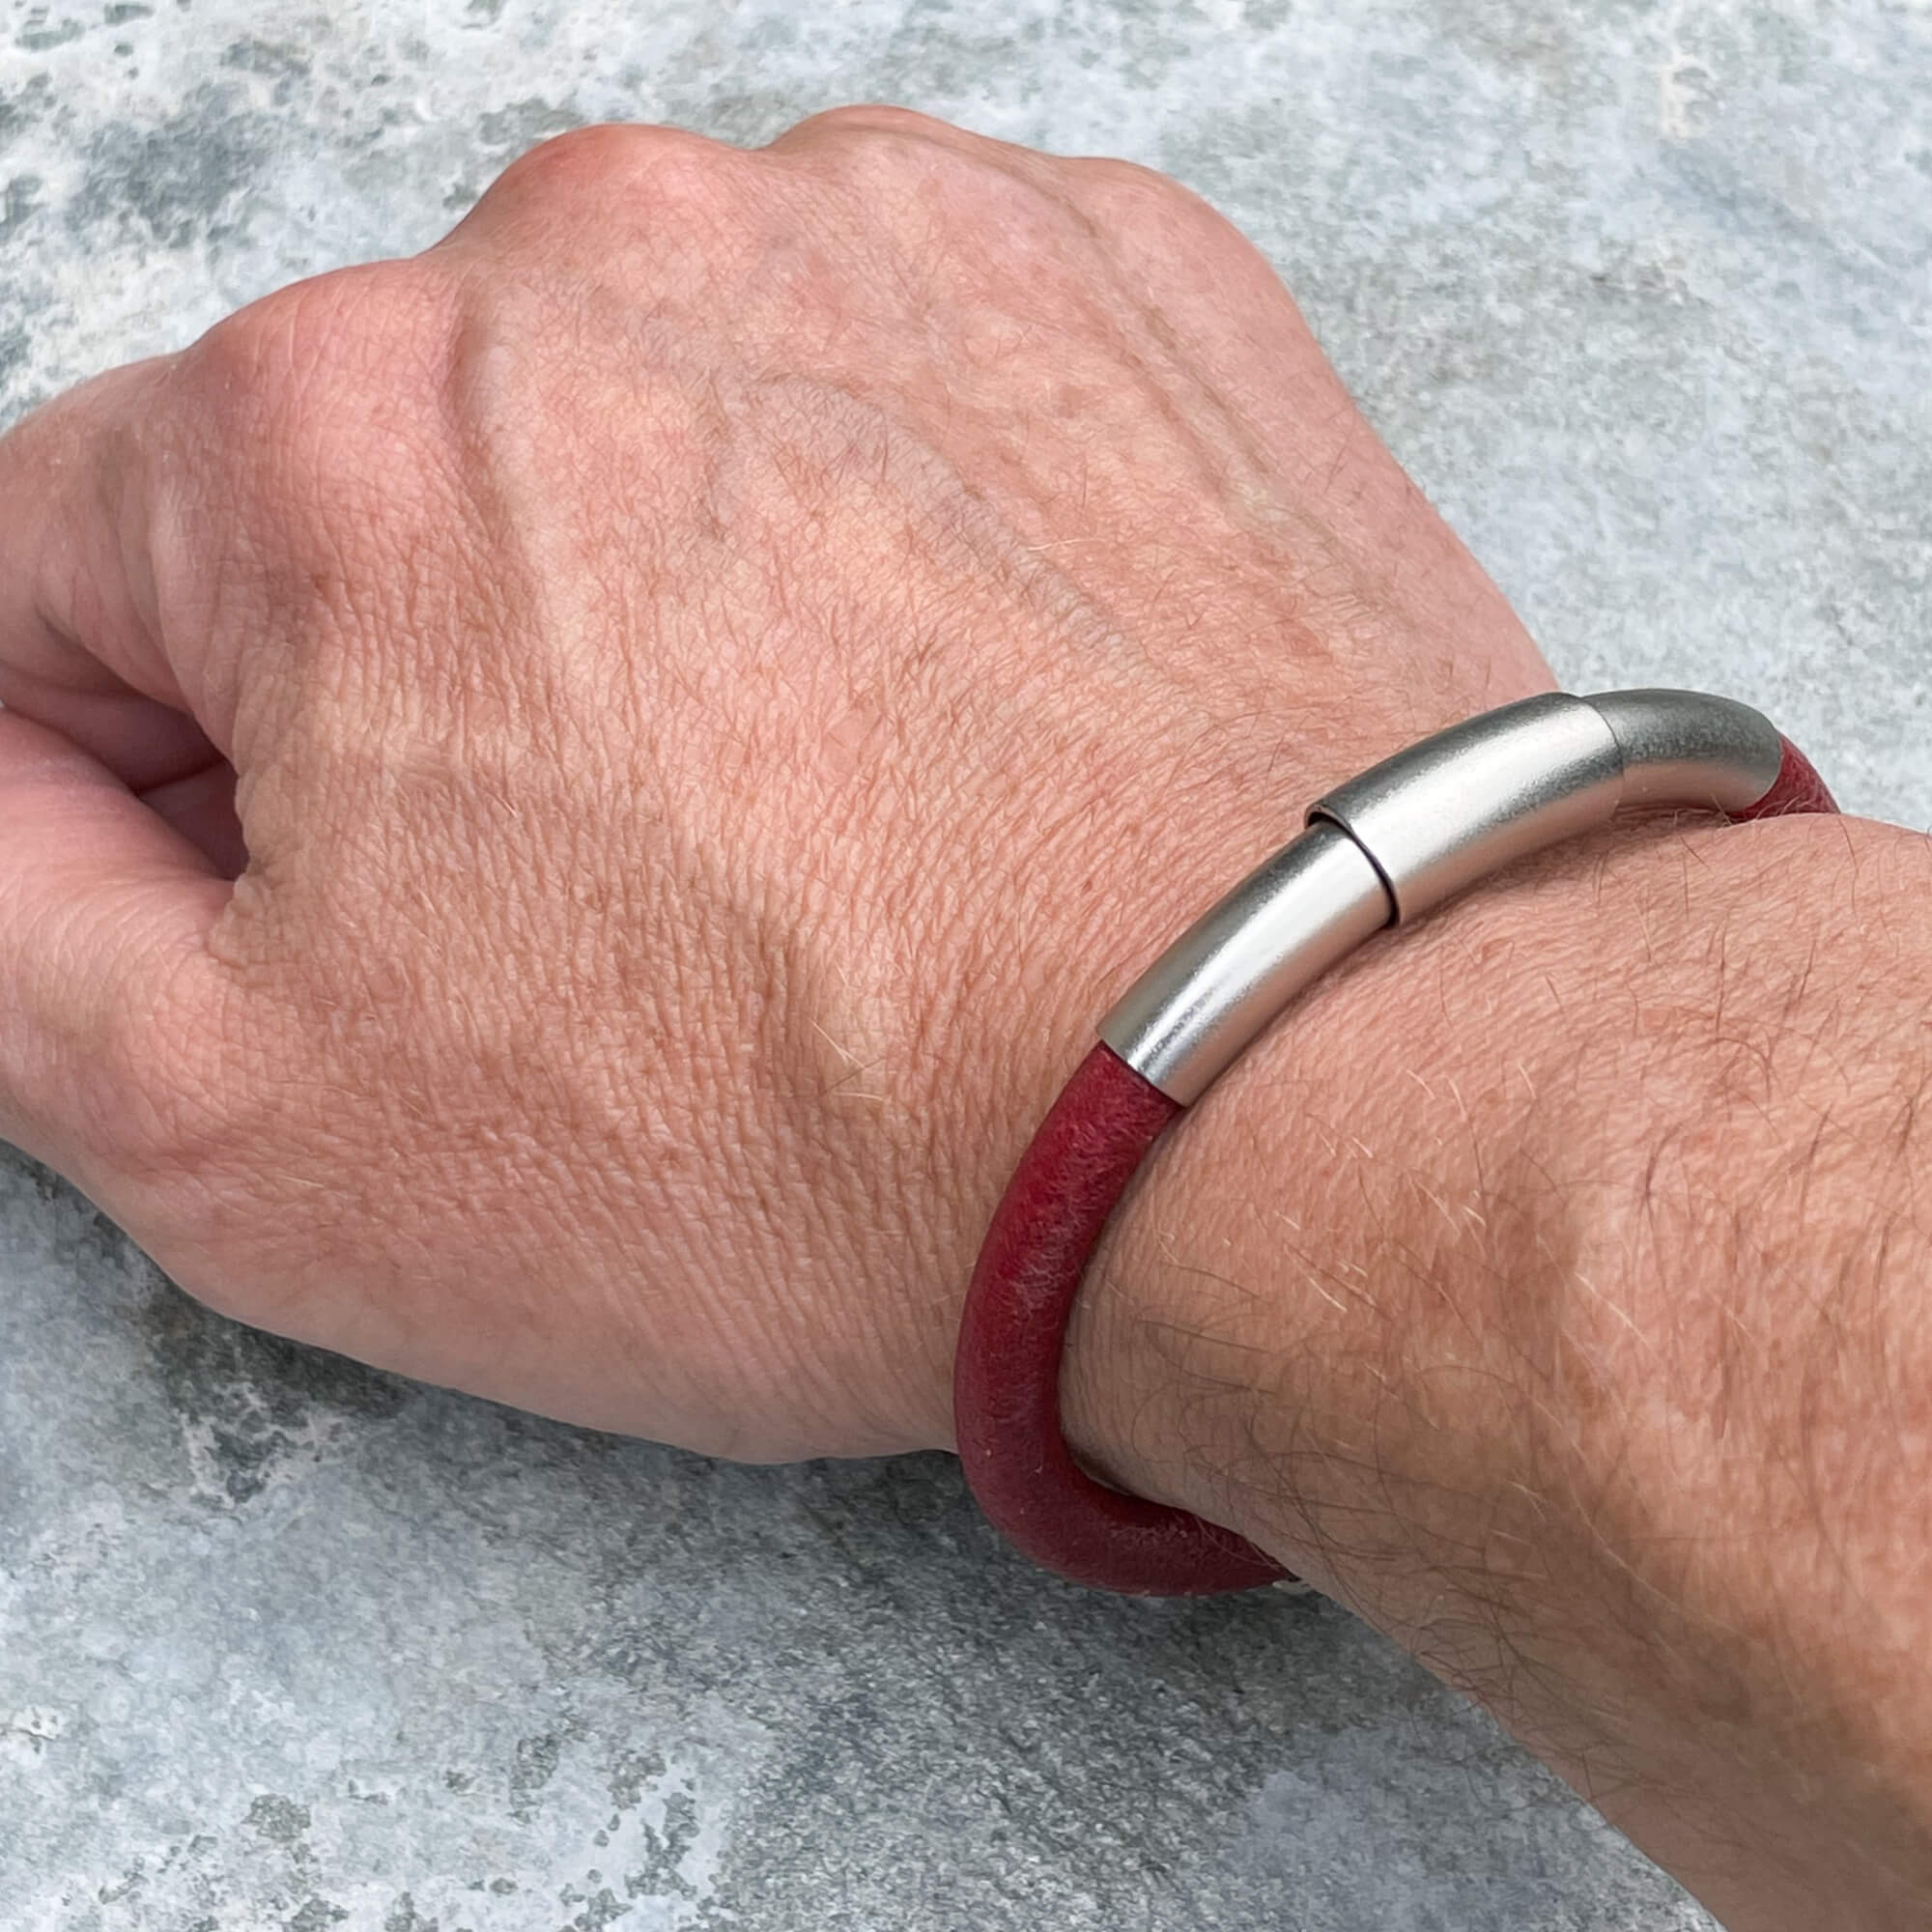 Red leather bracelet with silver colored band from stainless steel